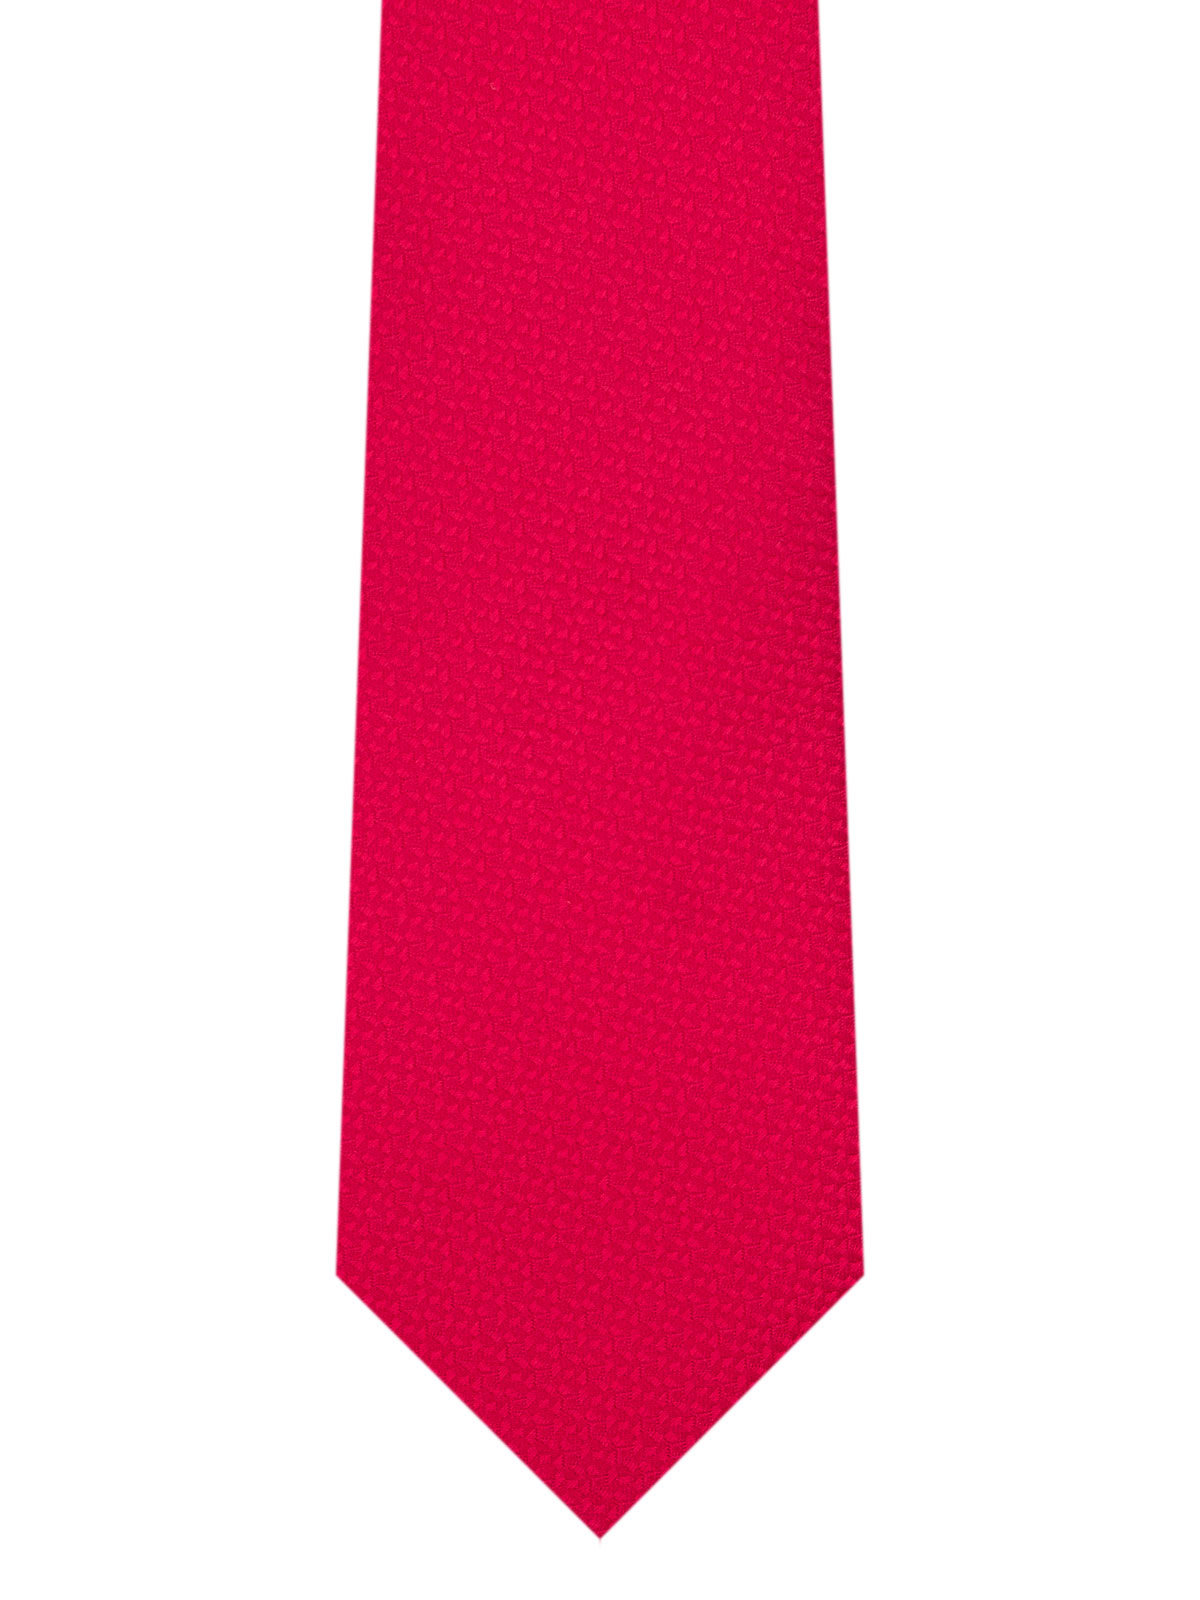 Structured tie in red - 10176 - € 14.06 img2